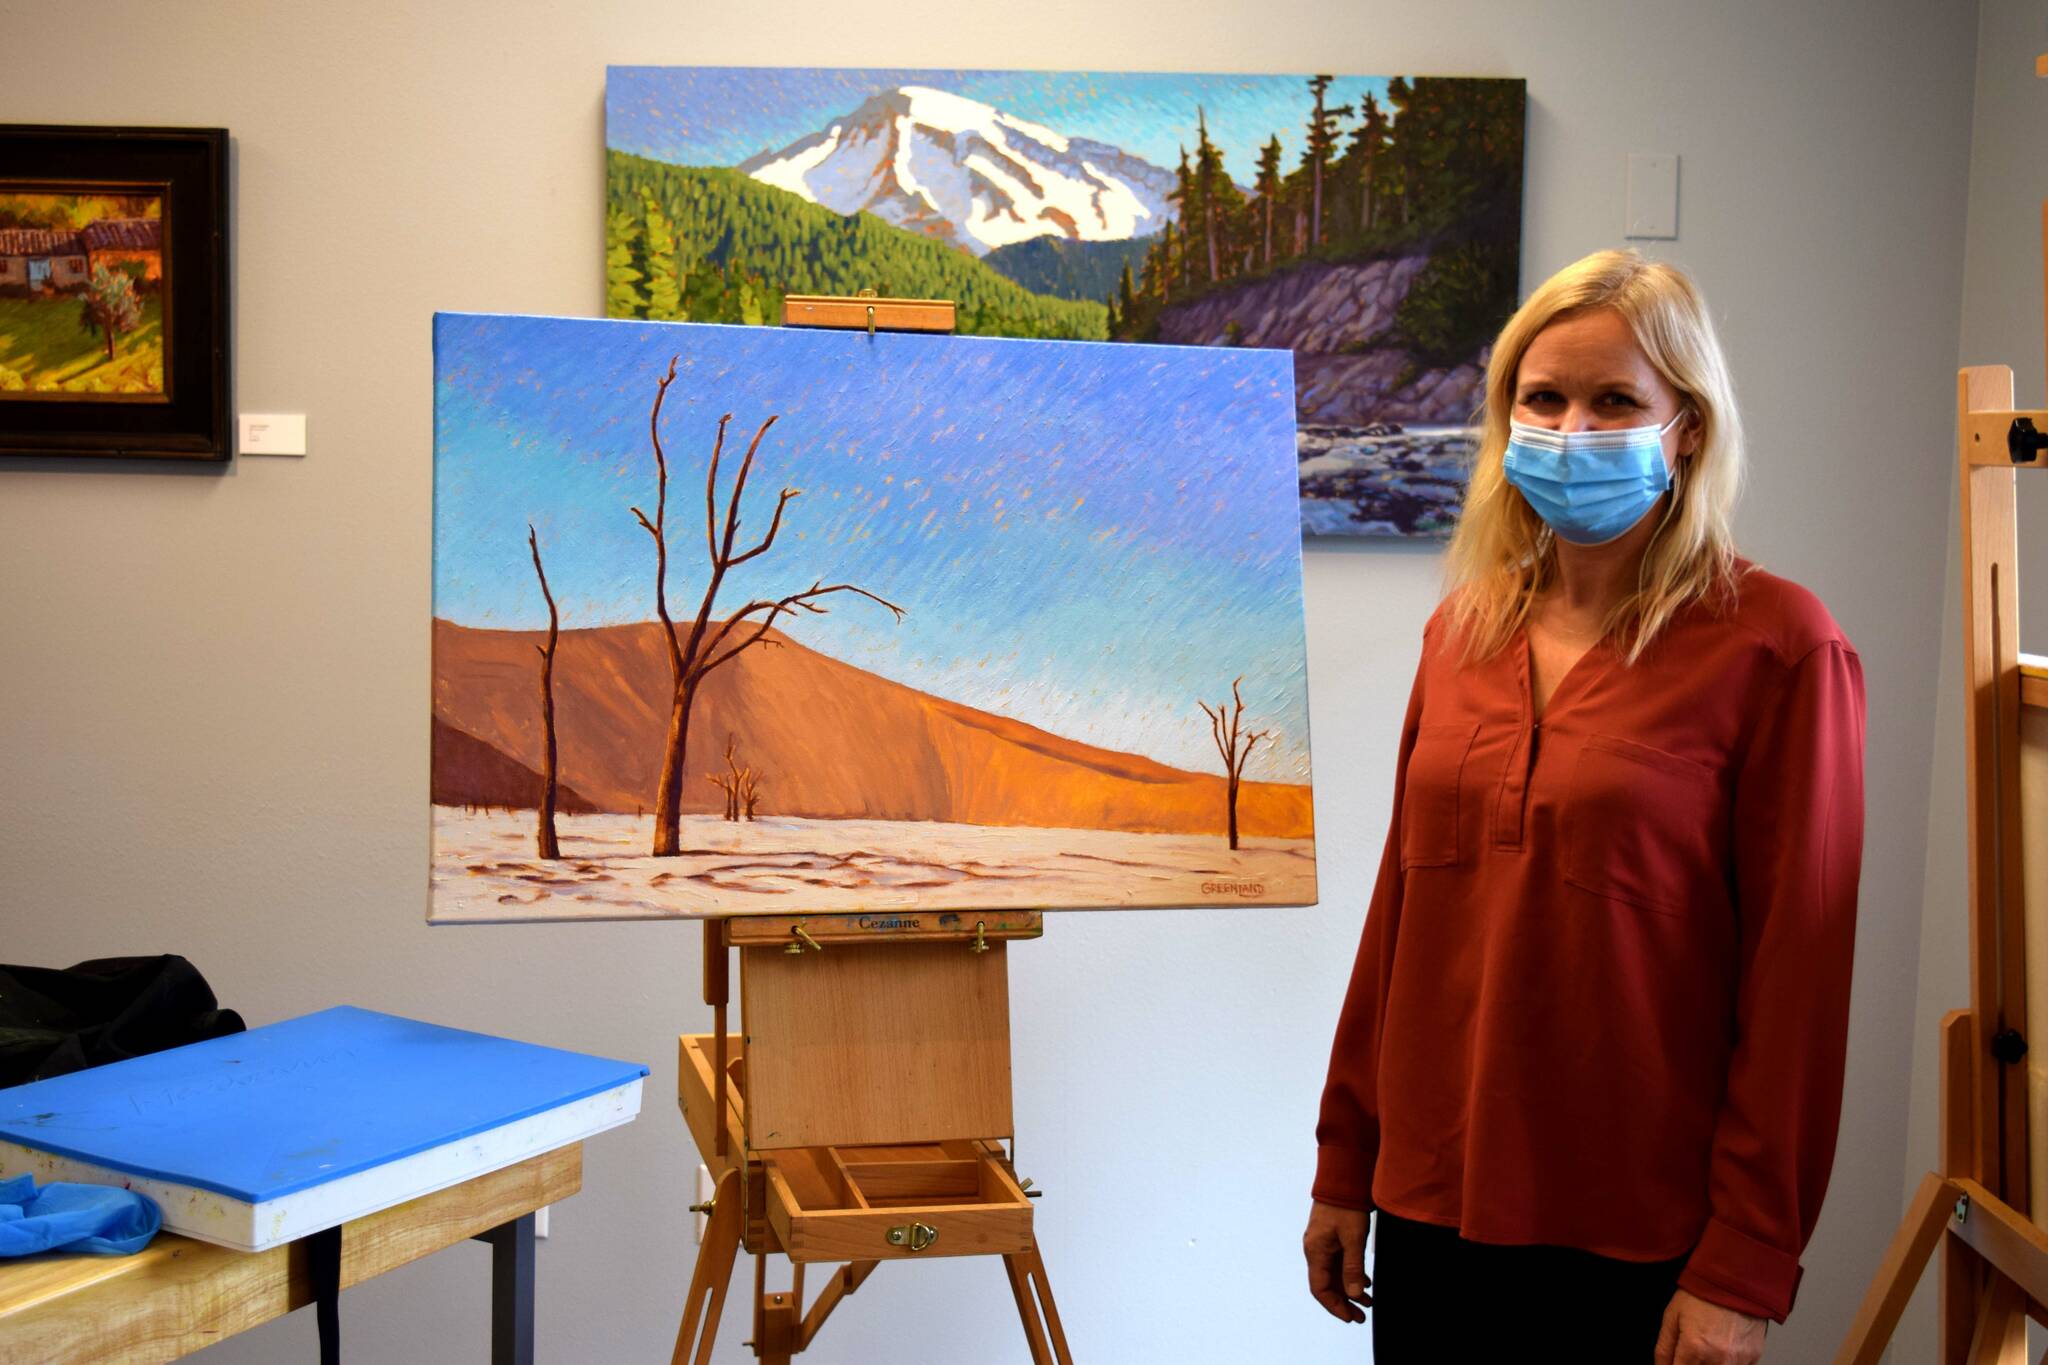 Photo by Conor Wilson/Valley Record
Local artist Britt Greenland poses with a custom painting of a customers trip to Namibia at her gallery in North Bend.